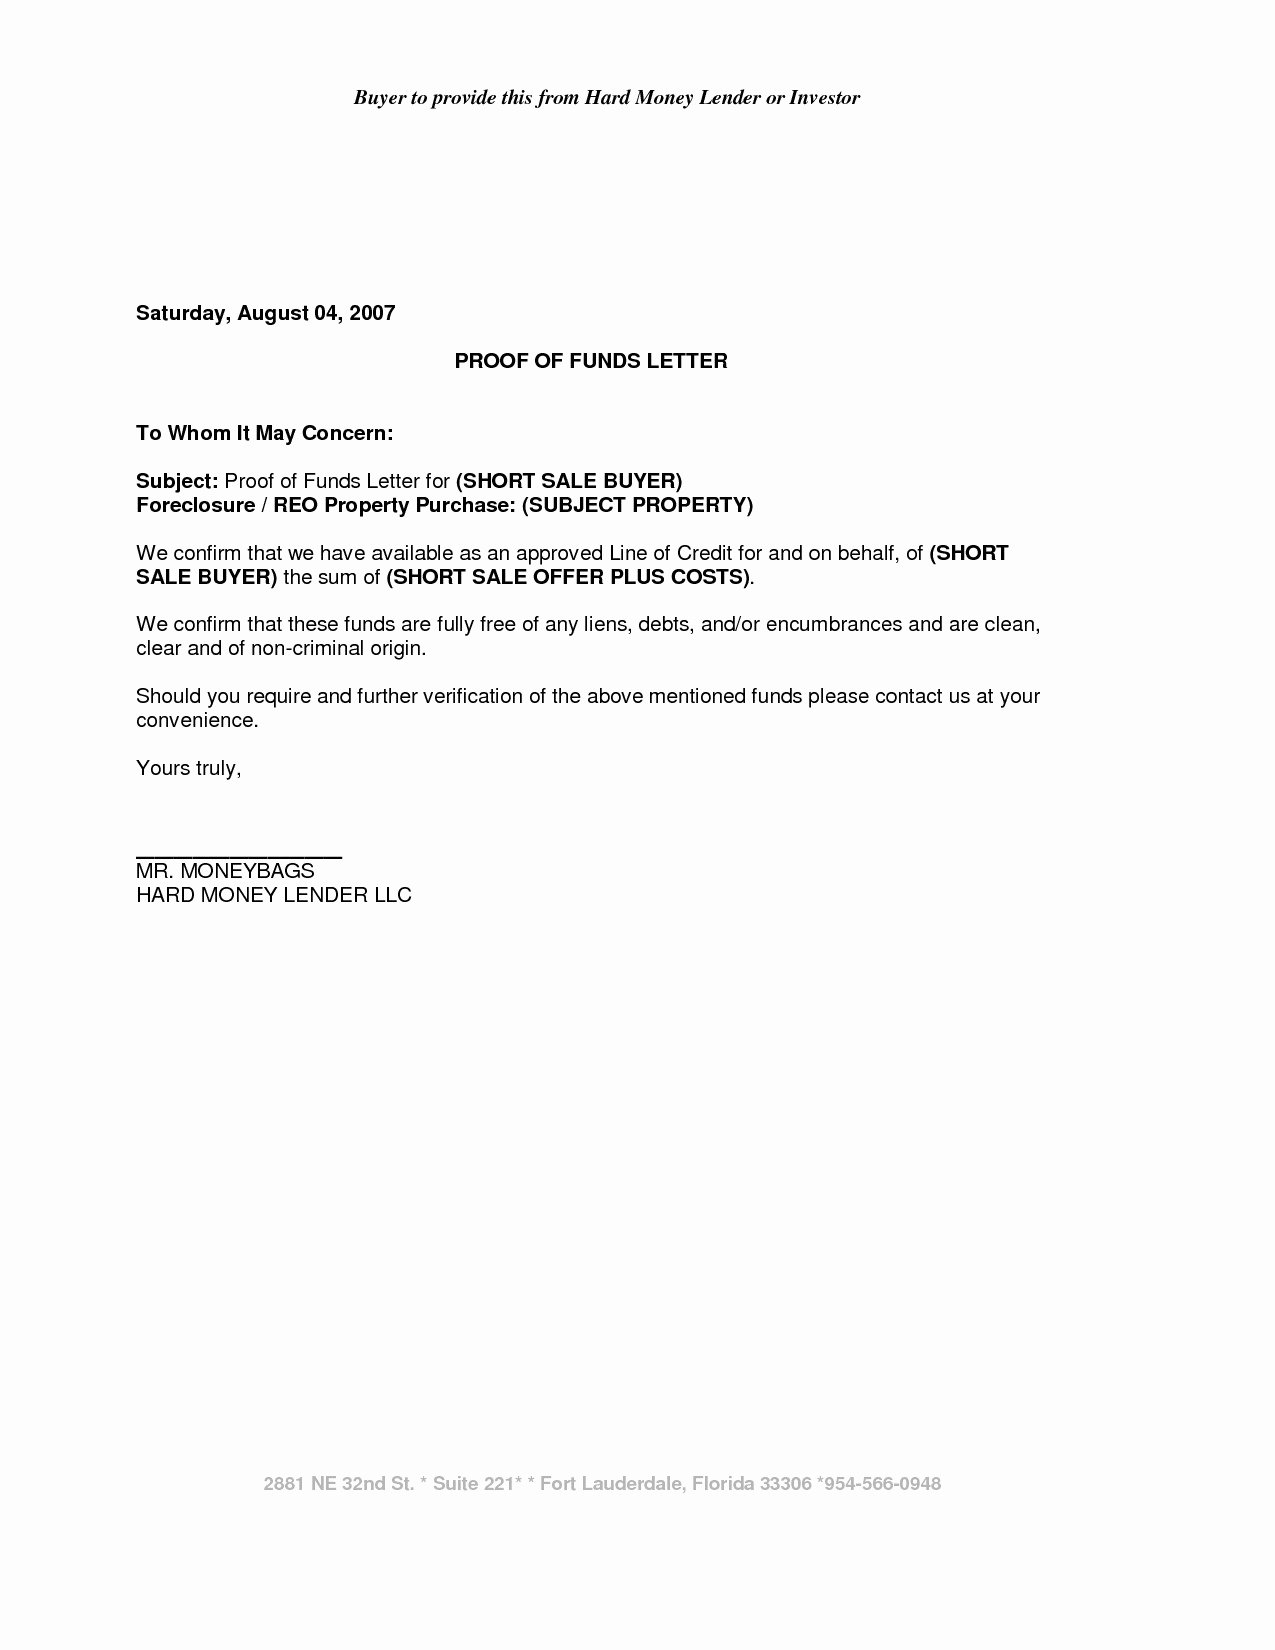 Proof Of Funds Letter Inspirational School Secretary Cover Letter Template Examples